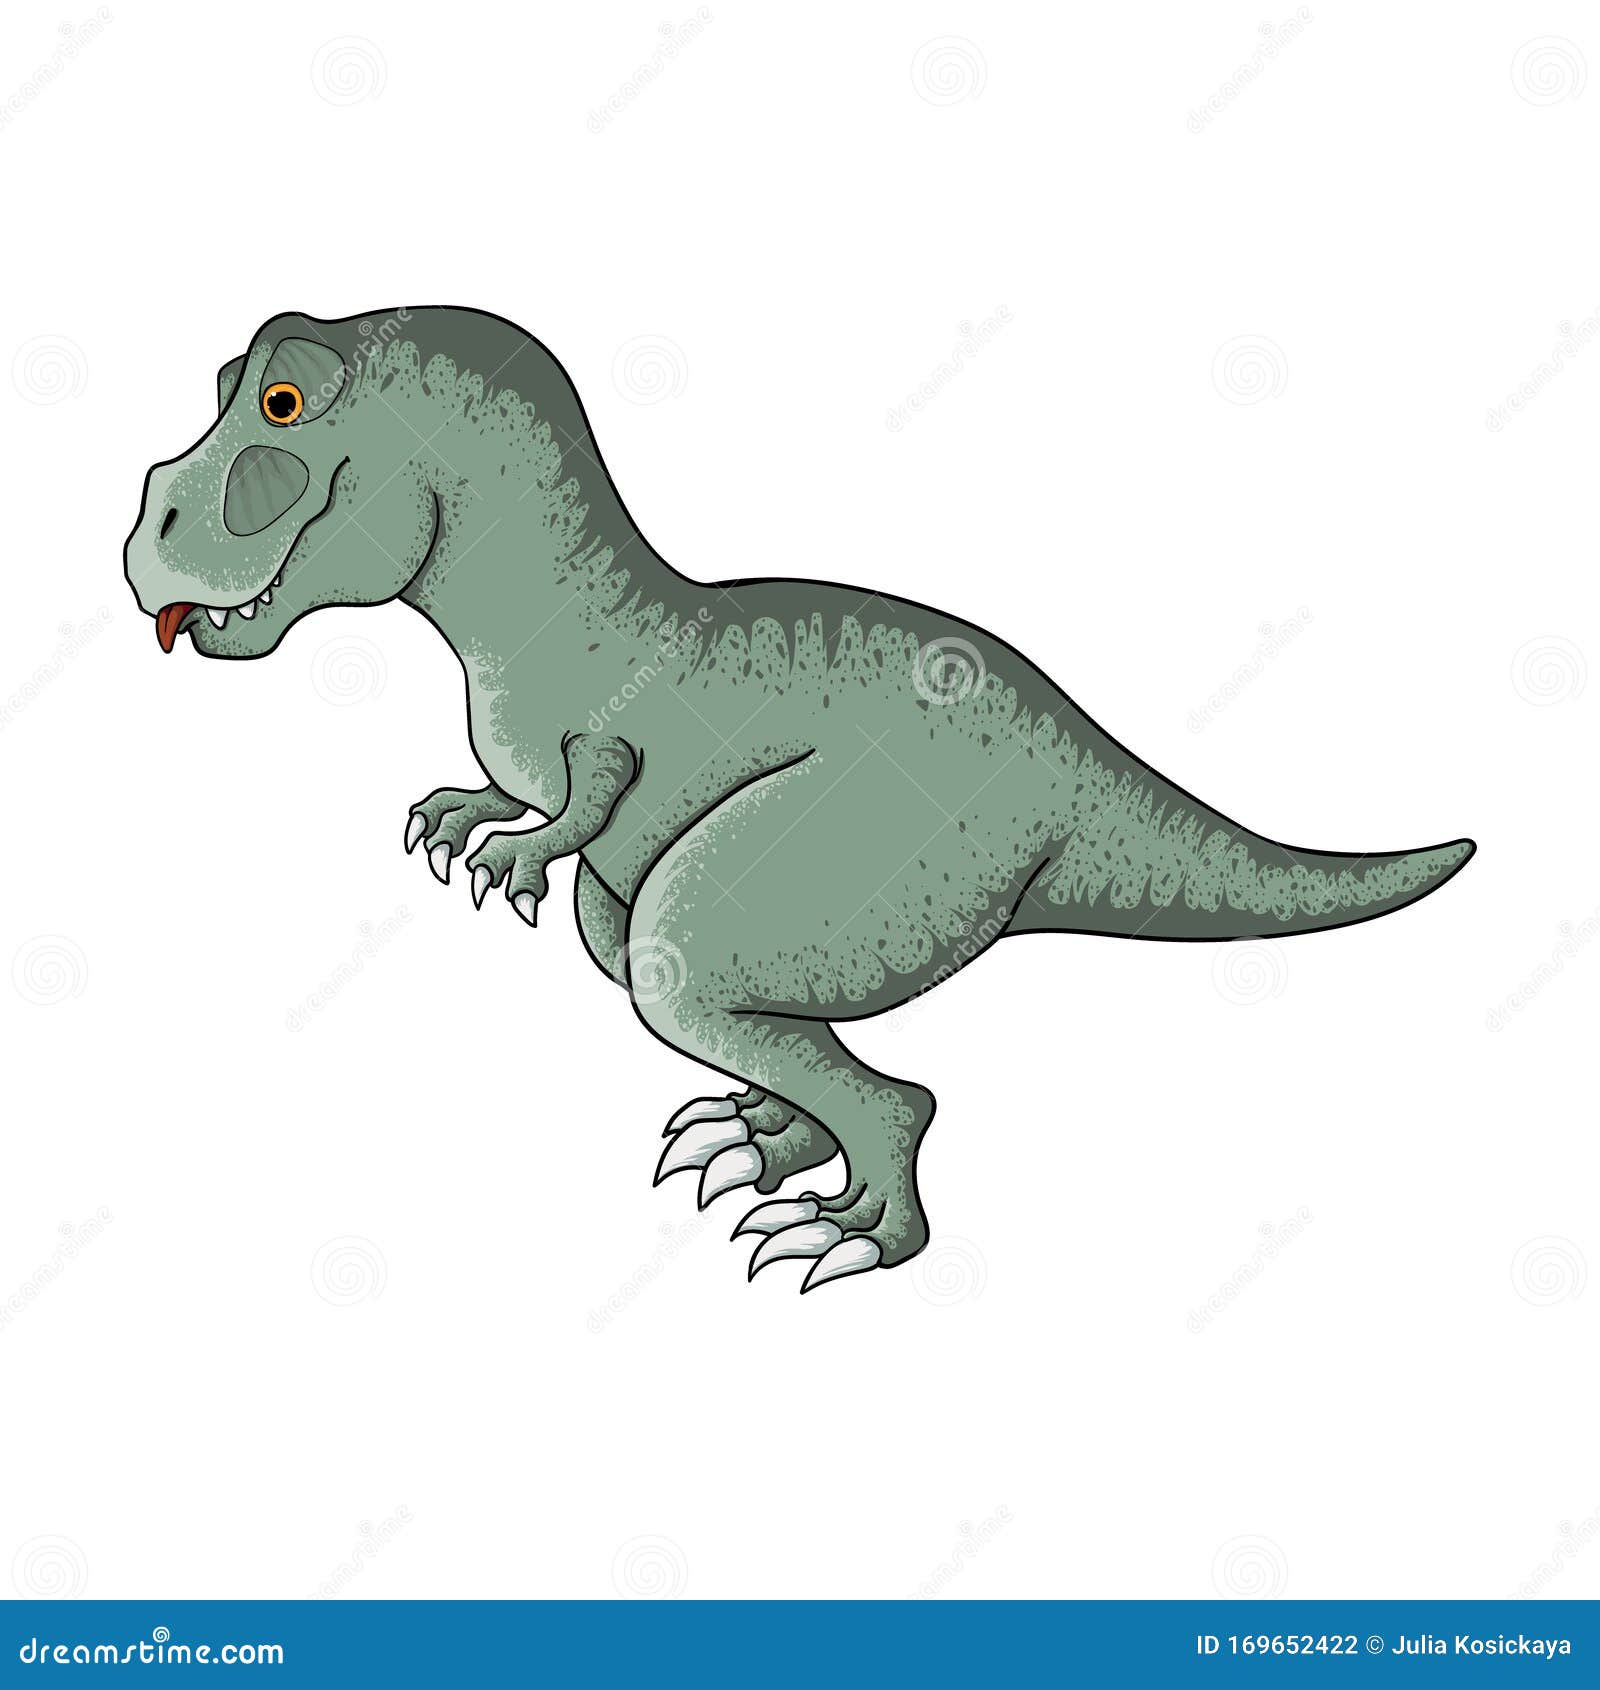  hand drawn  of cute tyrannosaurus  in cartoons style. dino tyrannosaur rex in kids comix style.  on whi